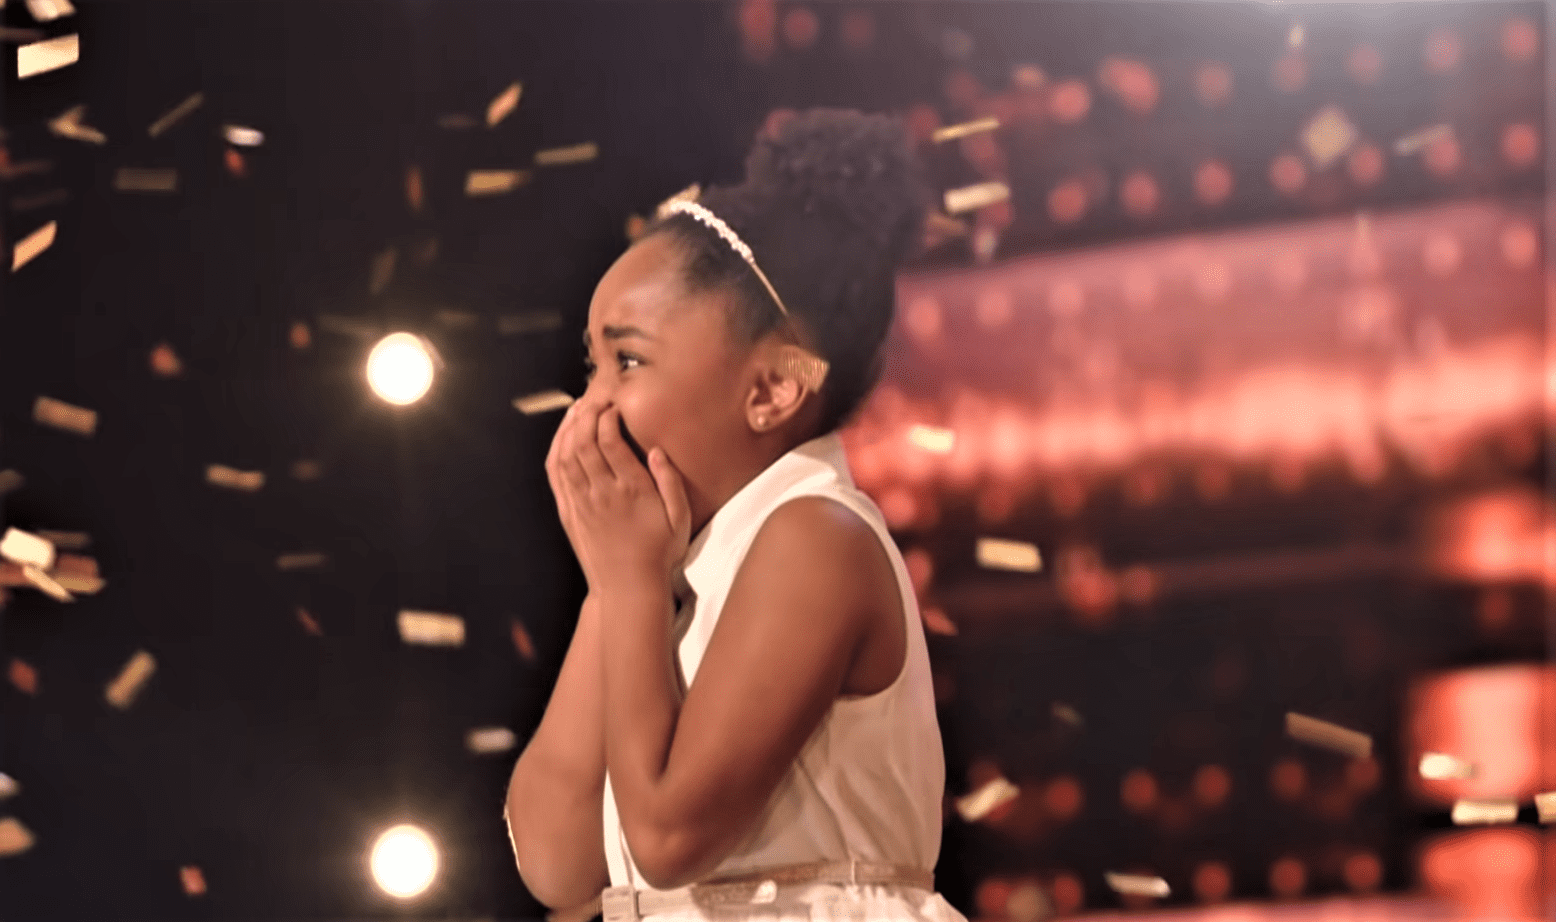 9-year-old Victory Brinker’s emotional reaction after she received 4 Golden Buzzers at “America’s Got Talent.” | Source: youtube.com/America’s Got Talent